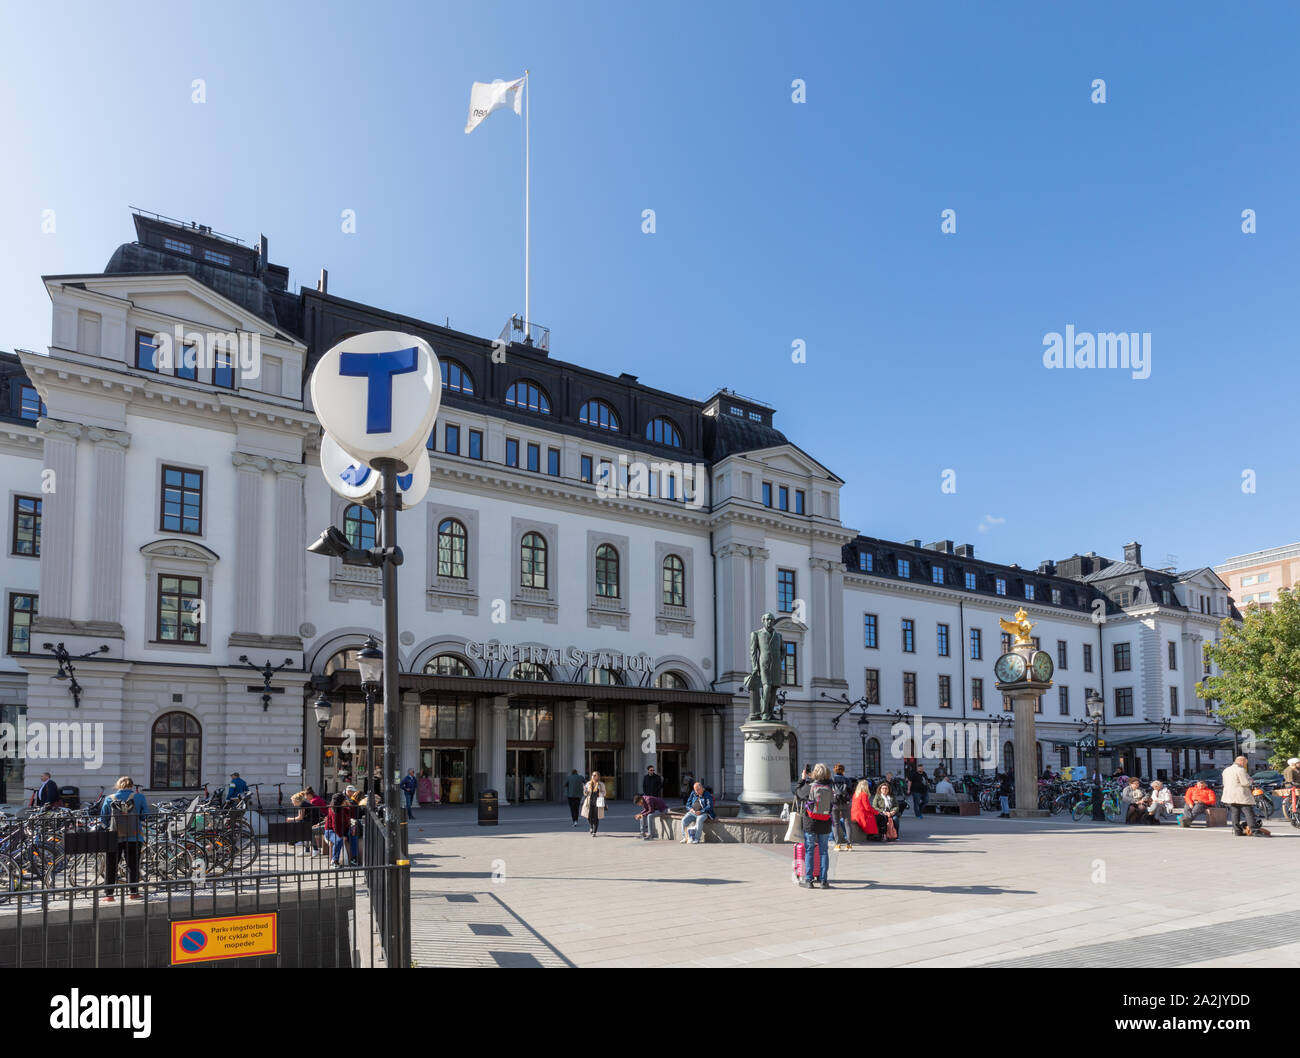 Stockholm, Sweden, 2019: Main entrance to the Central Station, the main railway station in Stockholm. A statue of Nils Ericson stands in front. Stock Photo